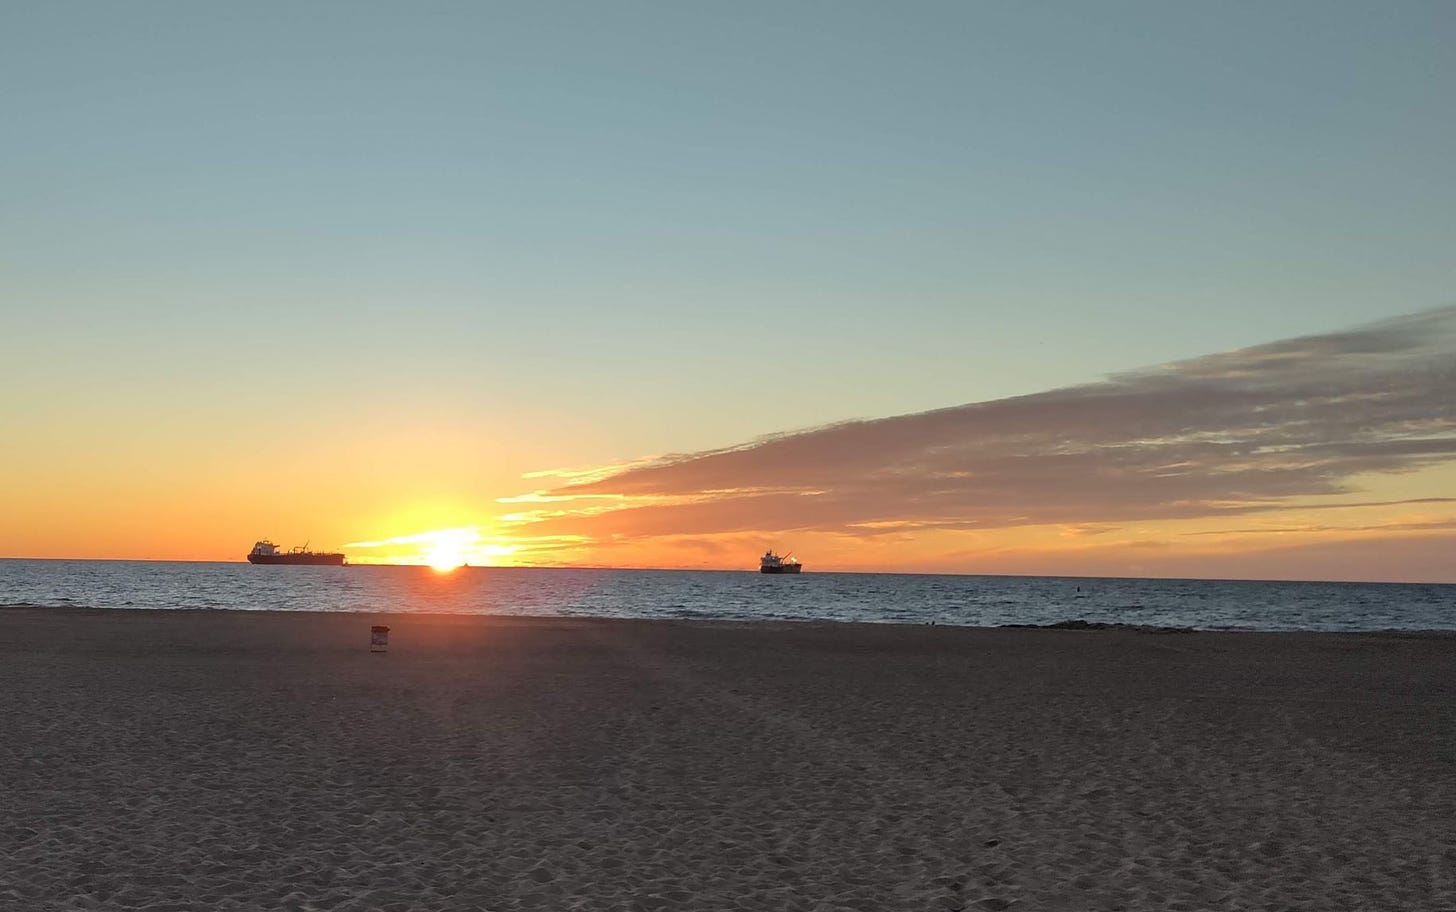 sun setting on the Pacific Ocean with two cargo ships in the background and beach in the foreground